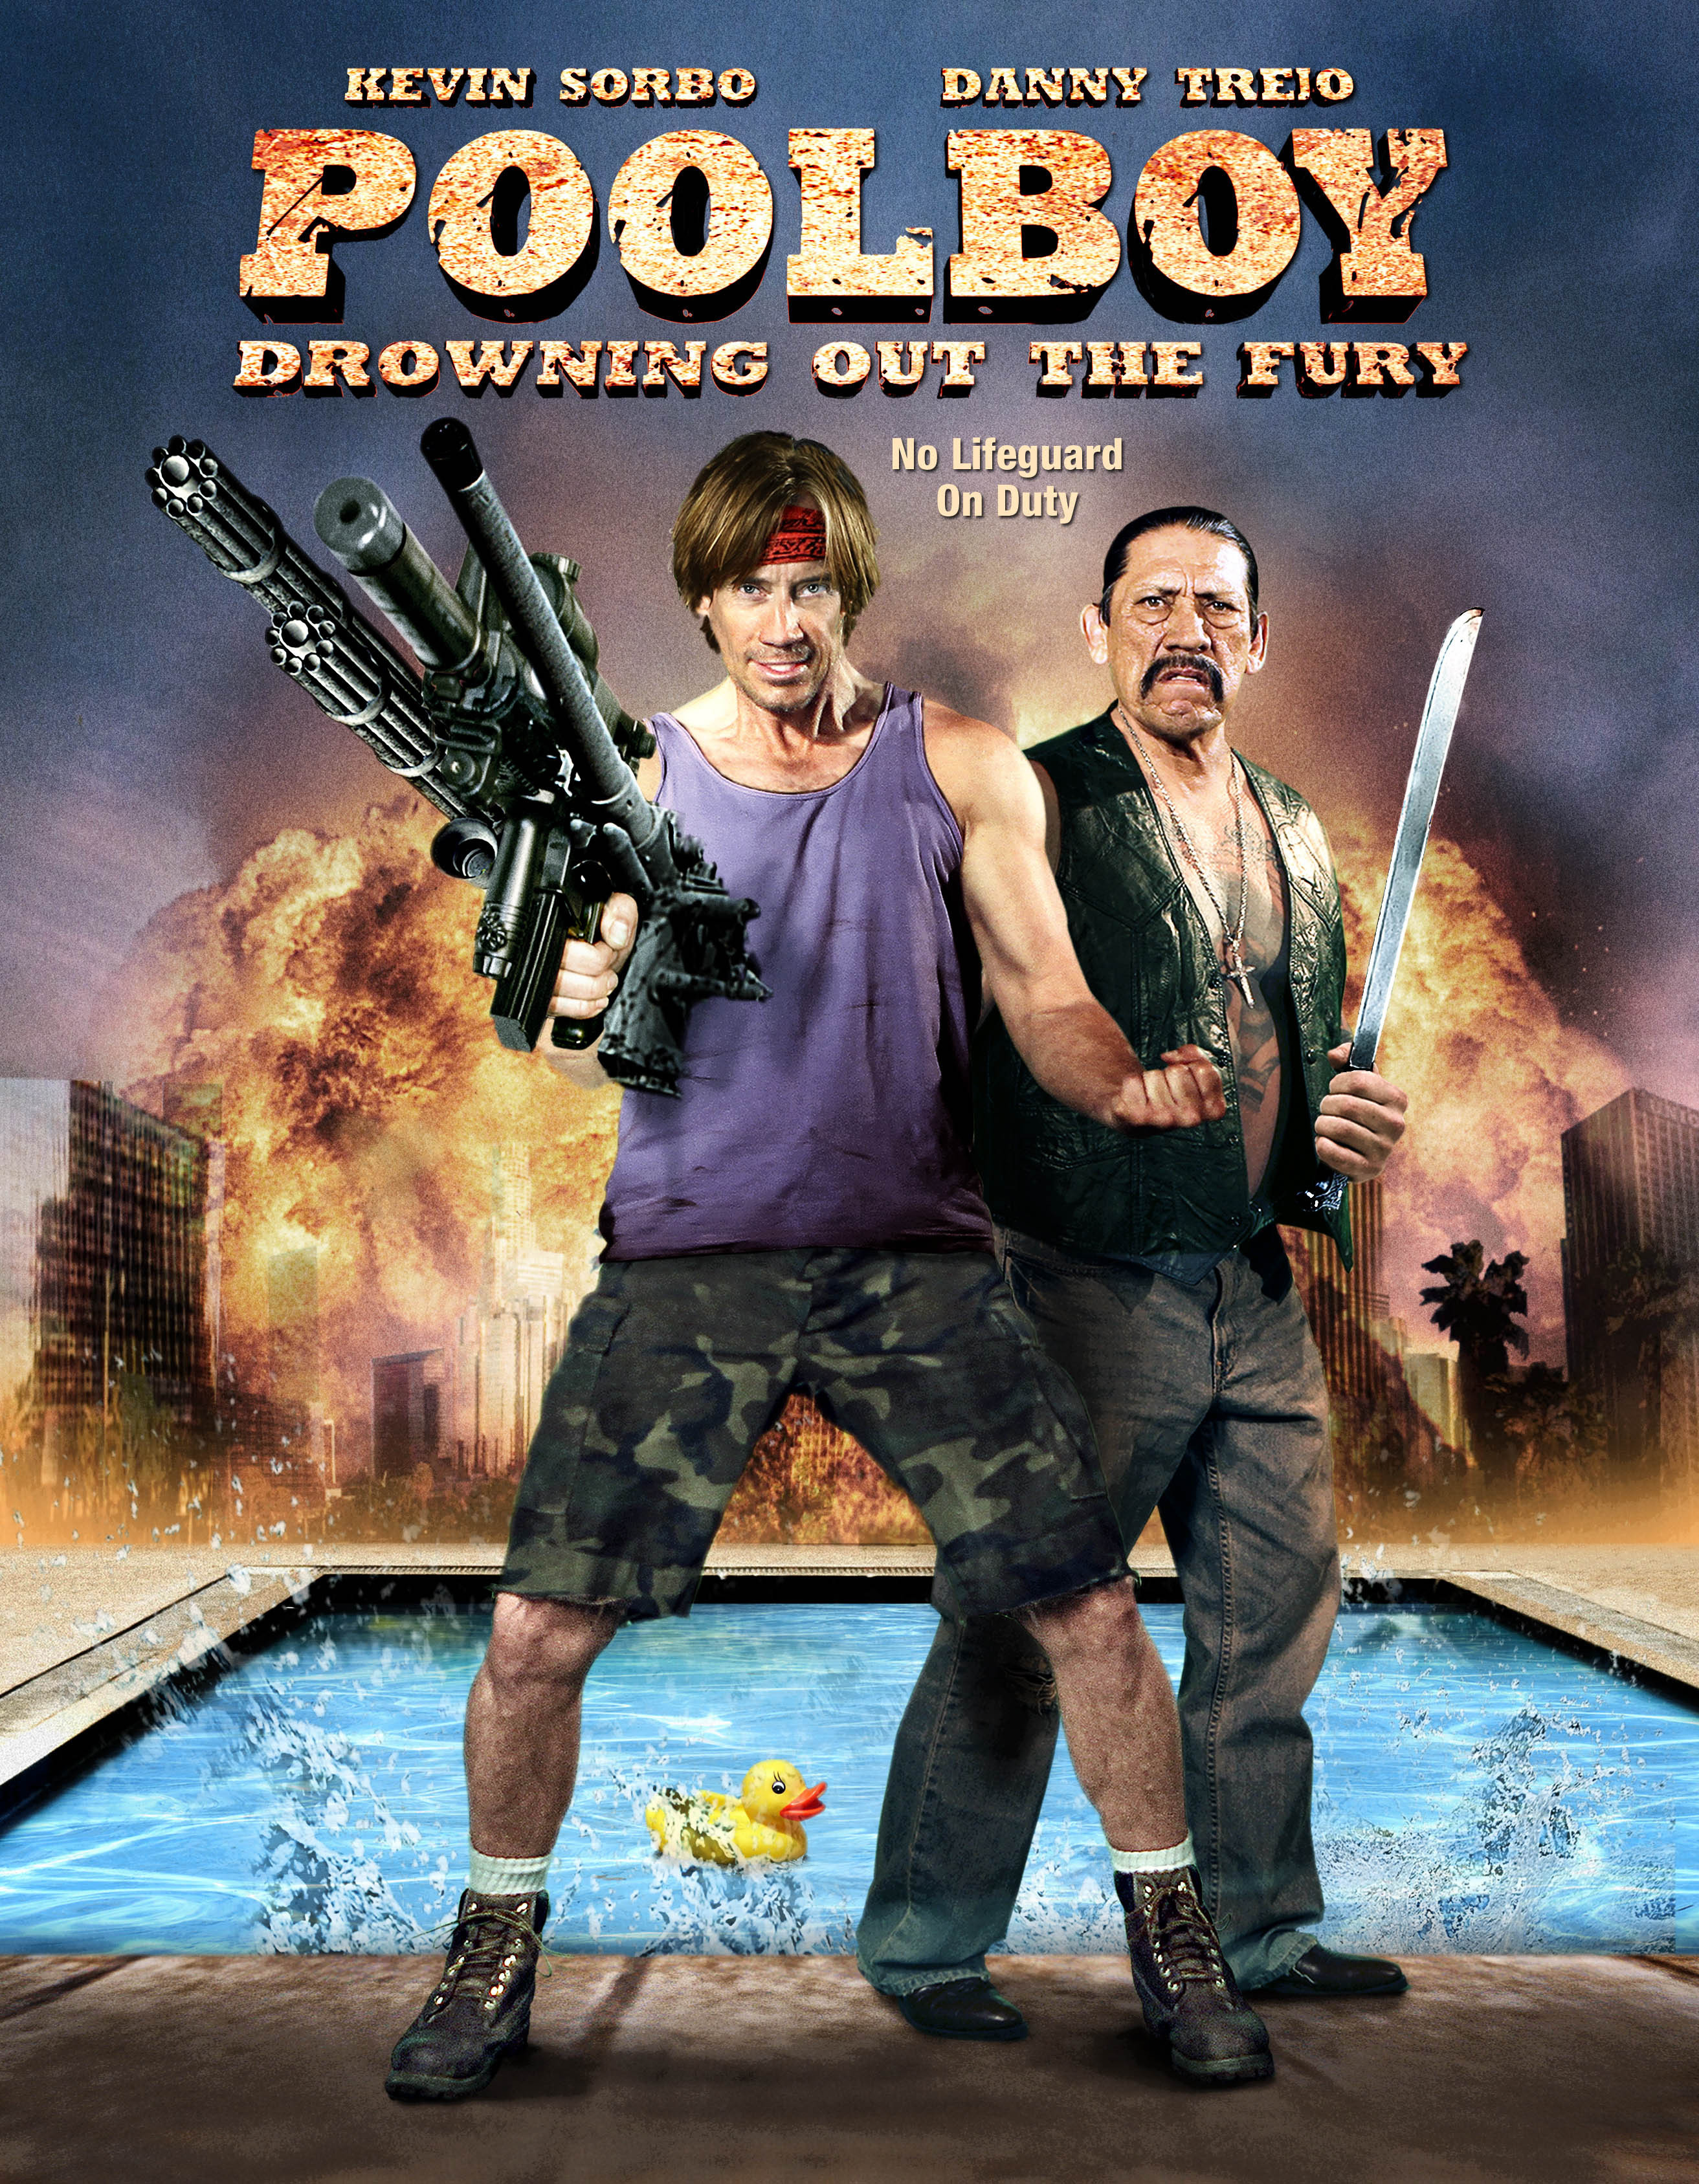 Poolboy: Drowning Out the Fury (2011) Cenas de Nudez